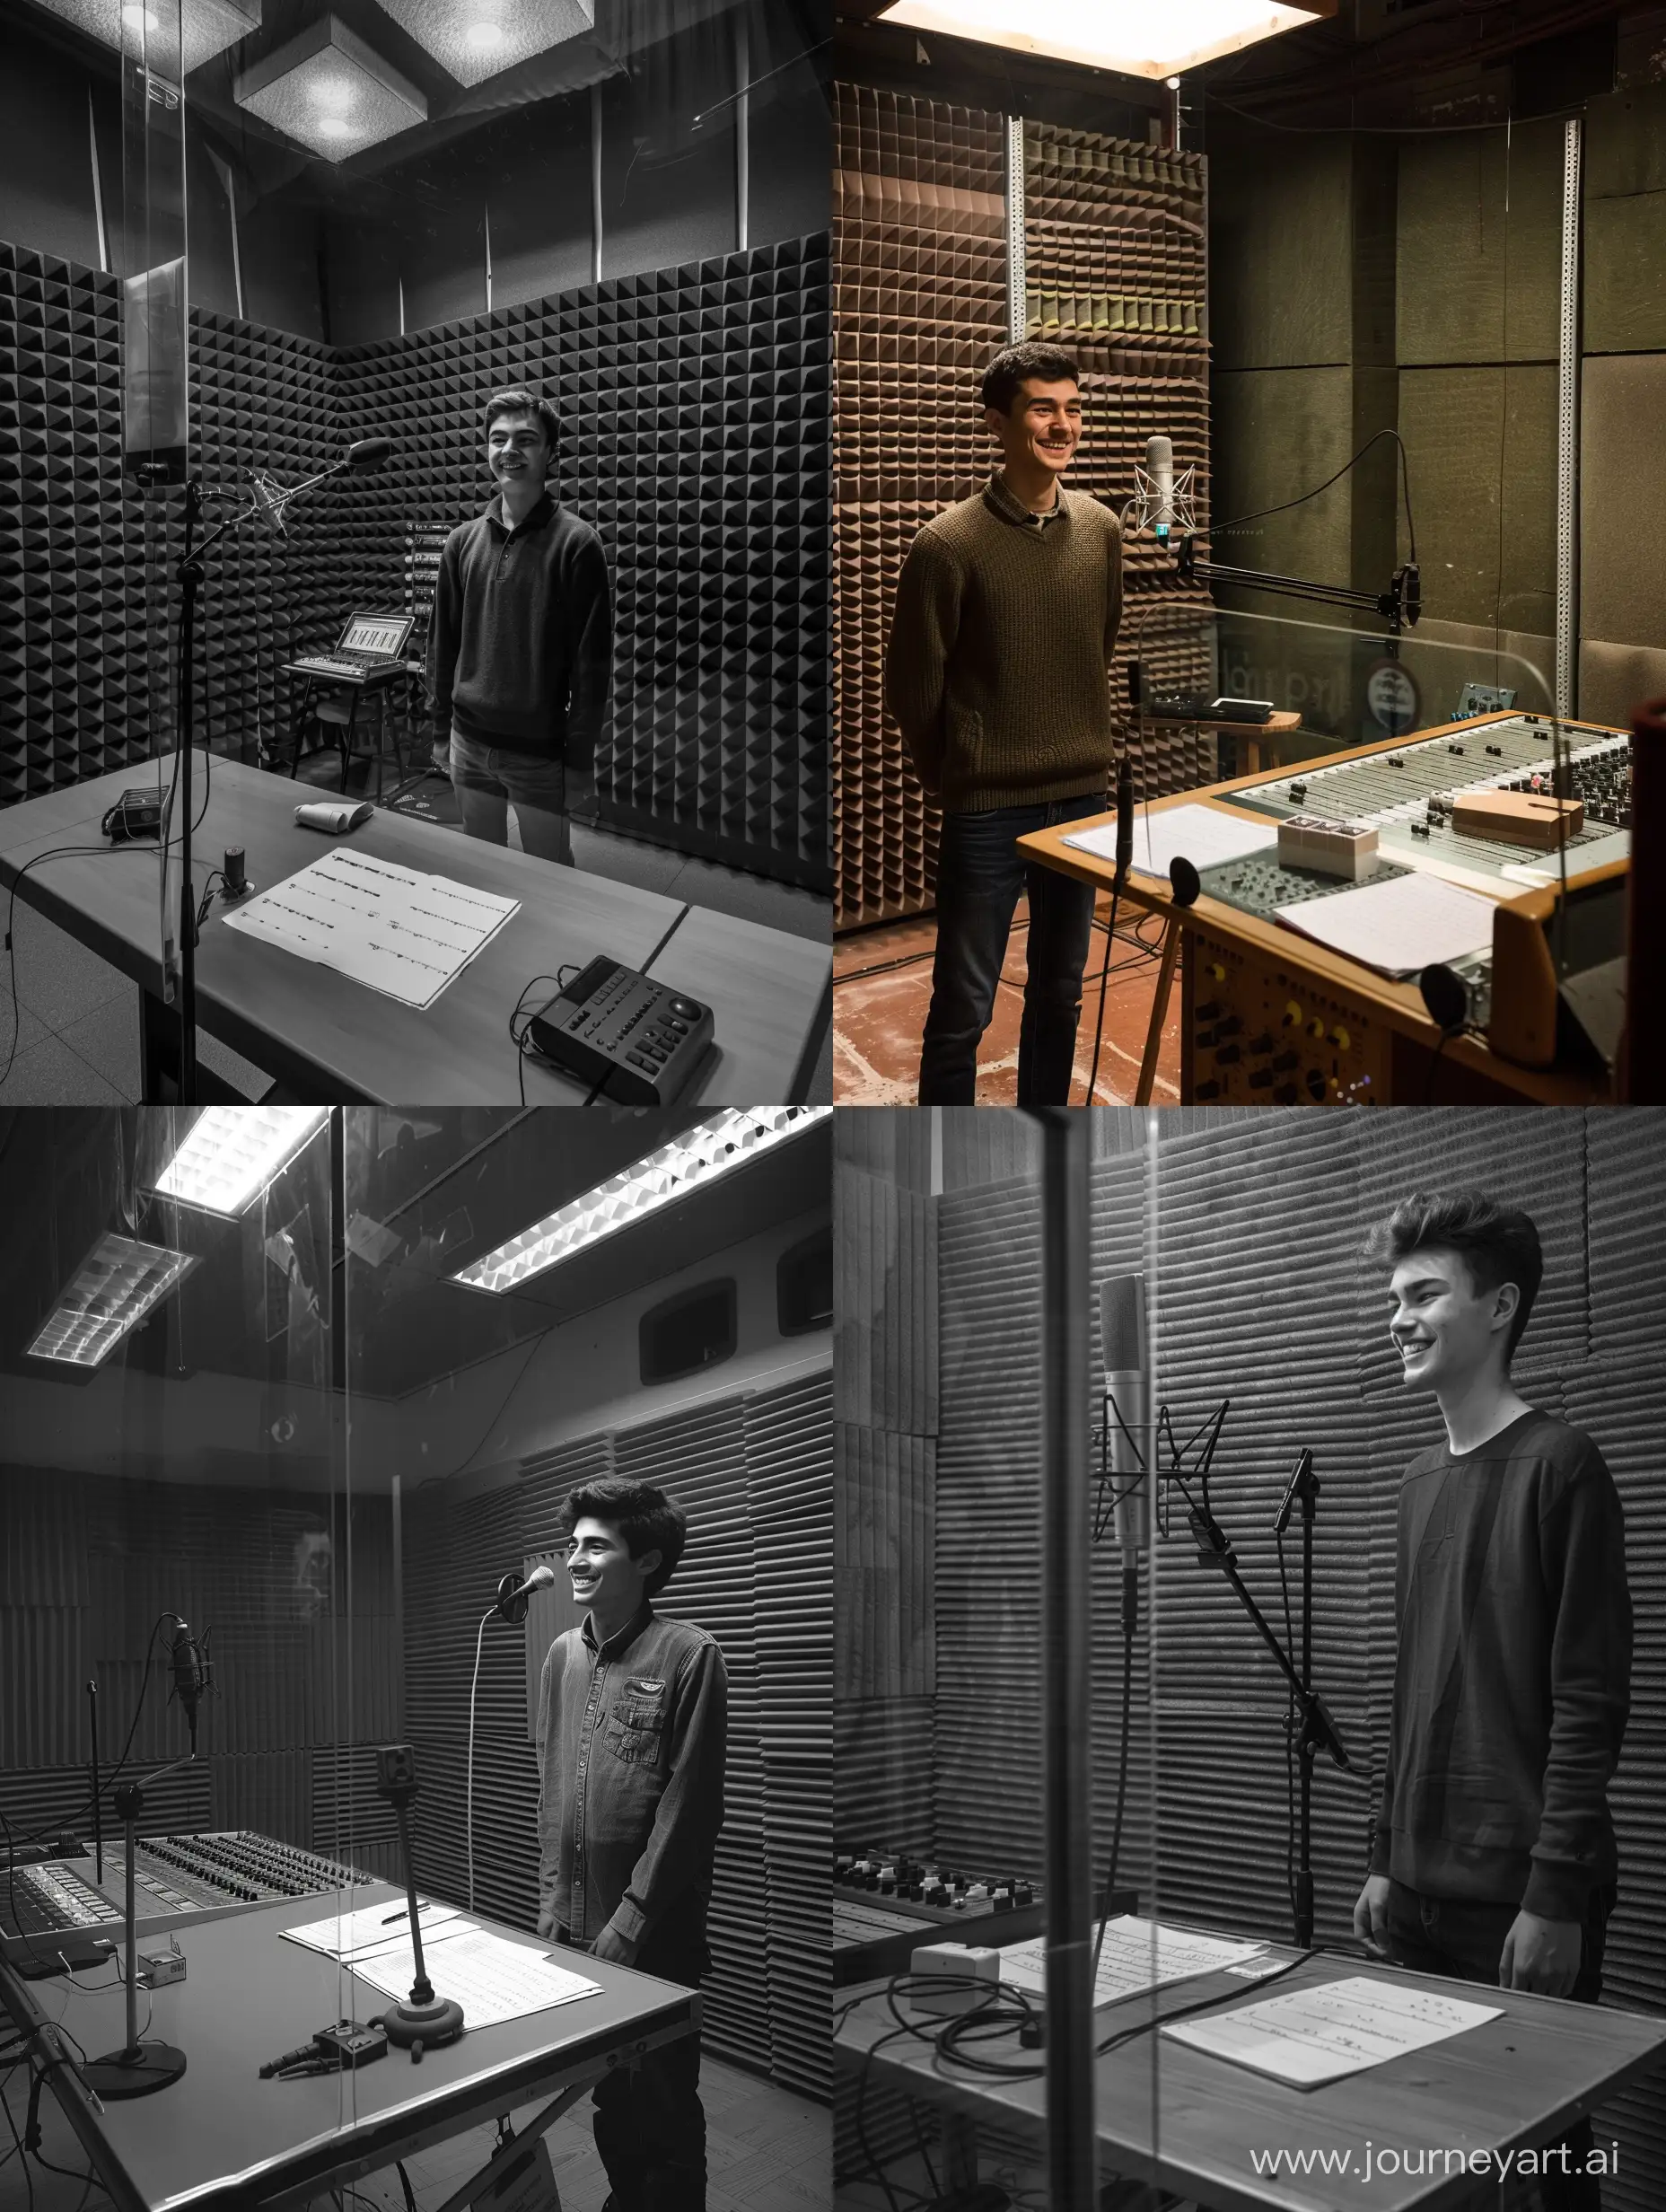 realistic photography of an Italian radio station. a young male speaker stands in the recording room and smiles into the microphone. the room is dimly lit and its walls are lined with acoustic insulation material. the room has bare furnishings, there is only the table with the notes on it, the microphone and, in front of the speaker's table, a transparent glass window that separates the control room